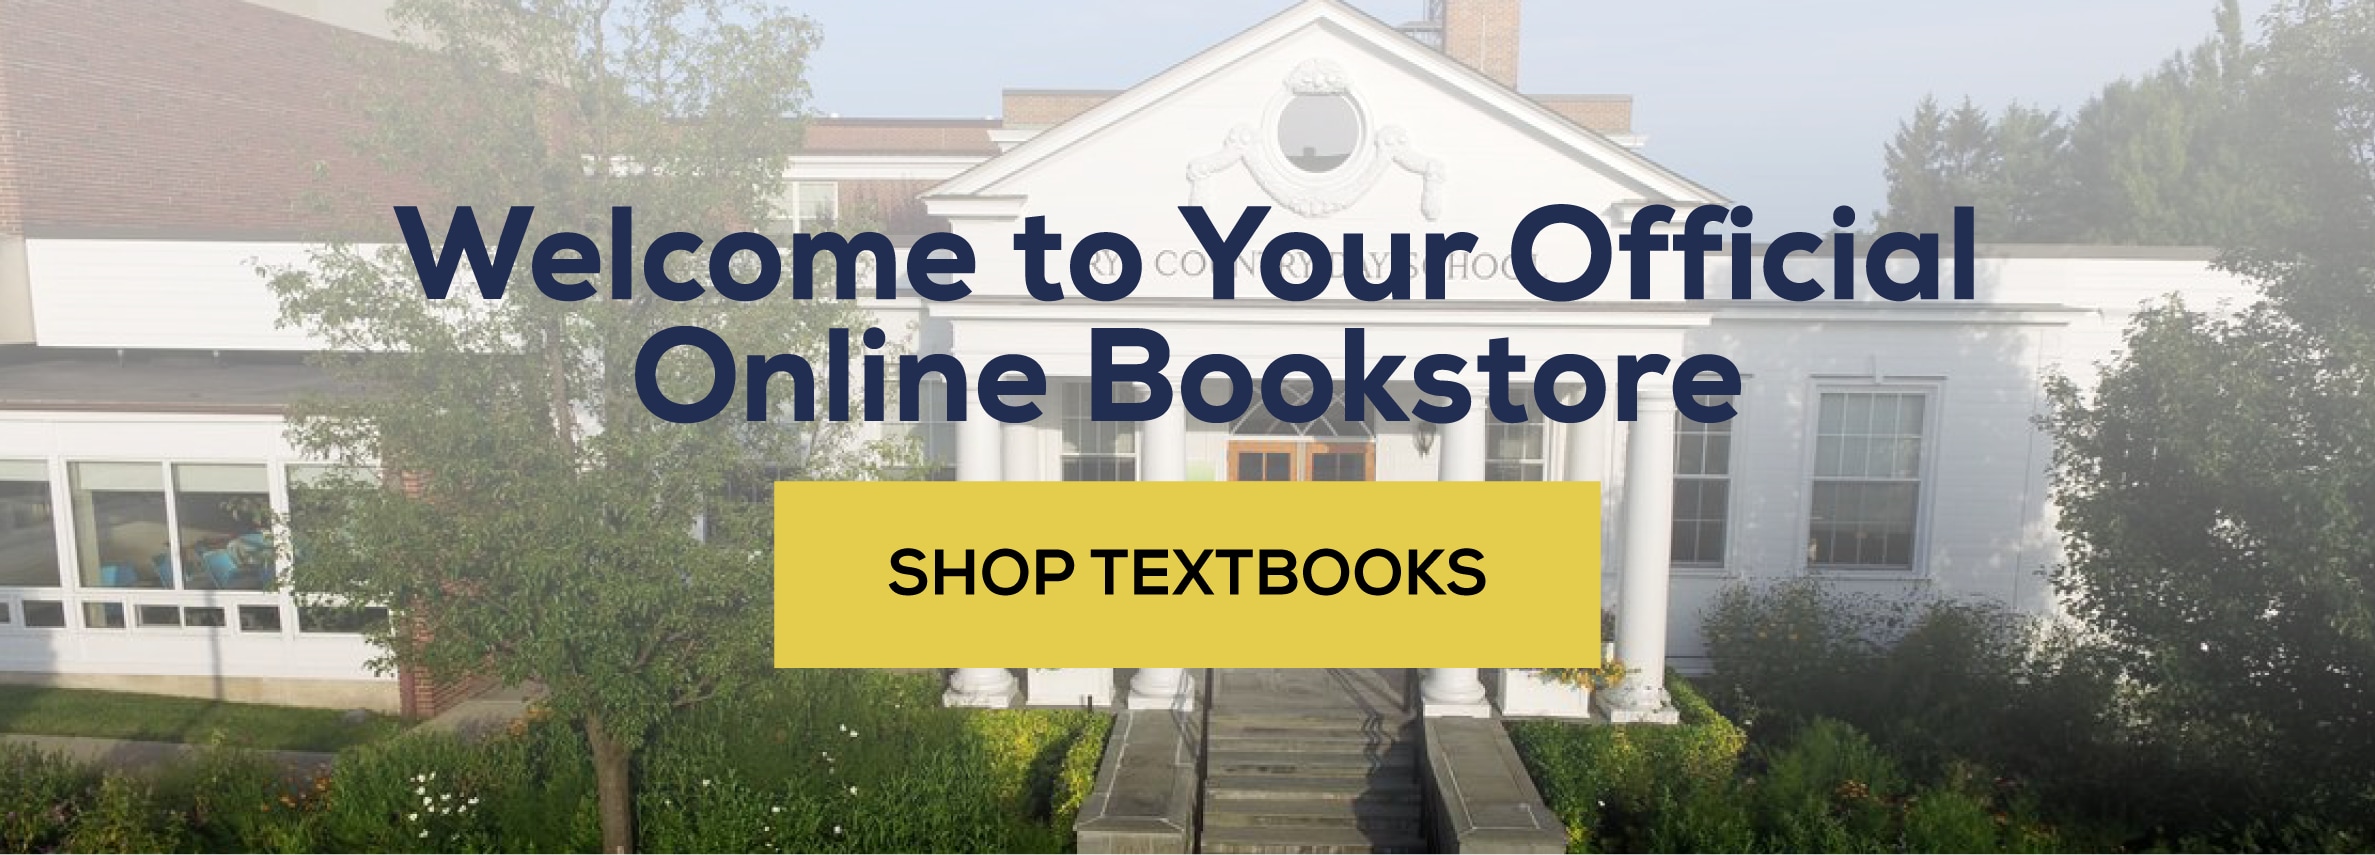 Welcome to Your Official Online Bookstore. Shop textbooks.